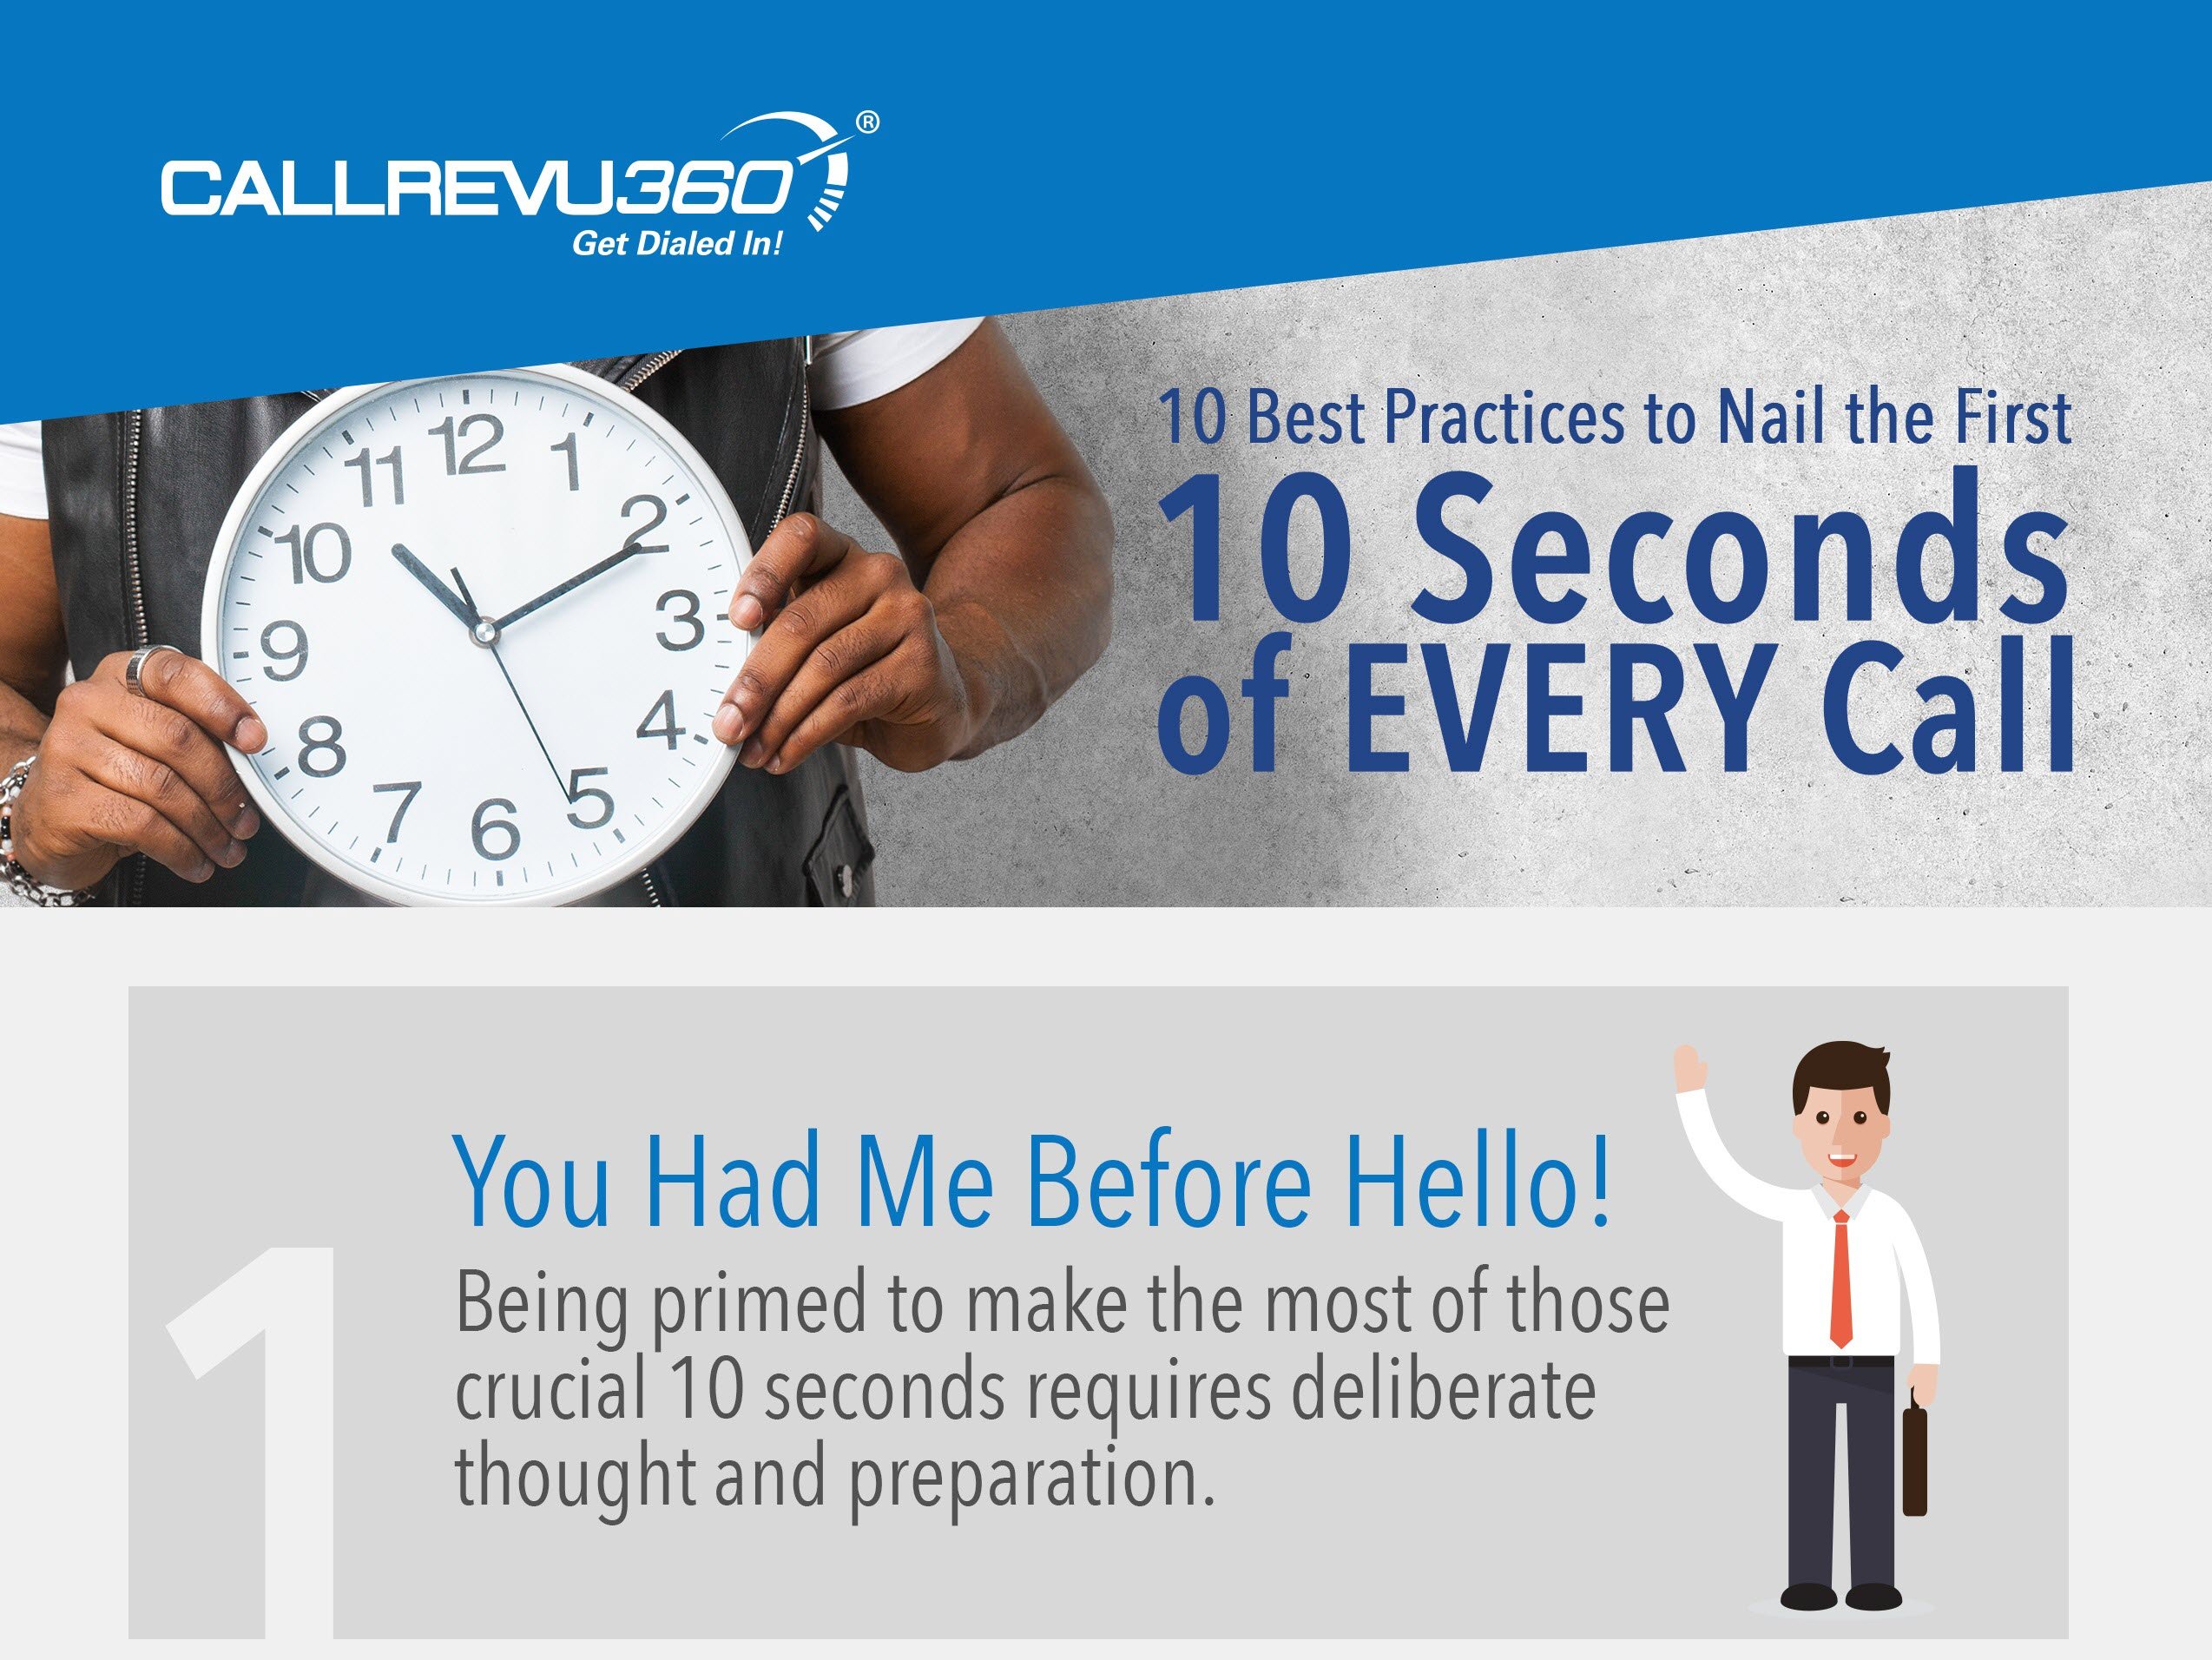 10 Best Practices to Nail the First 10 Seconds of Every Call